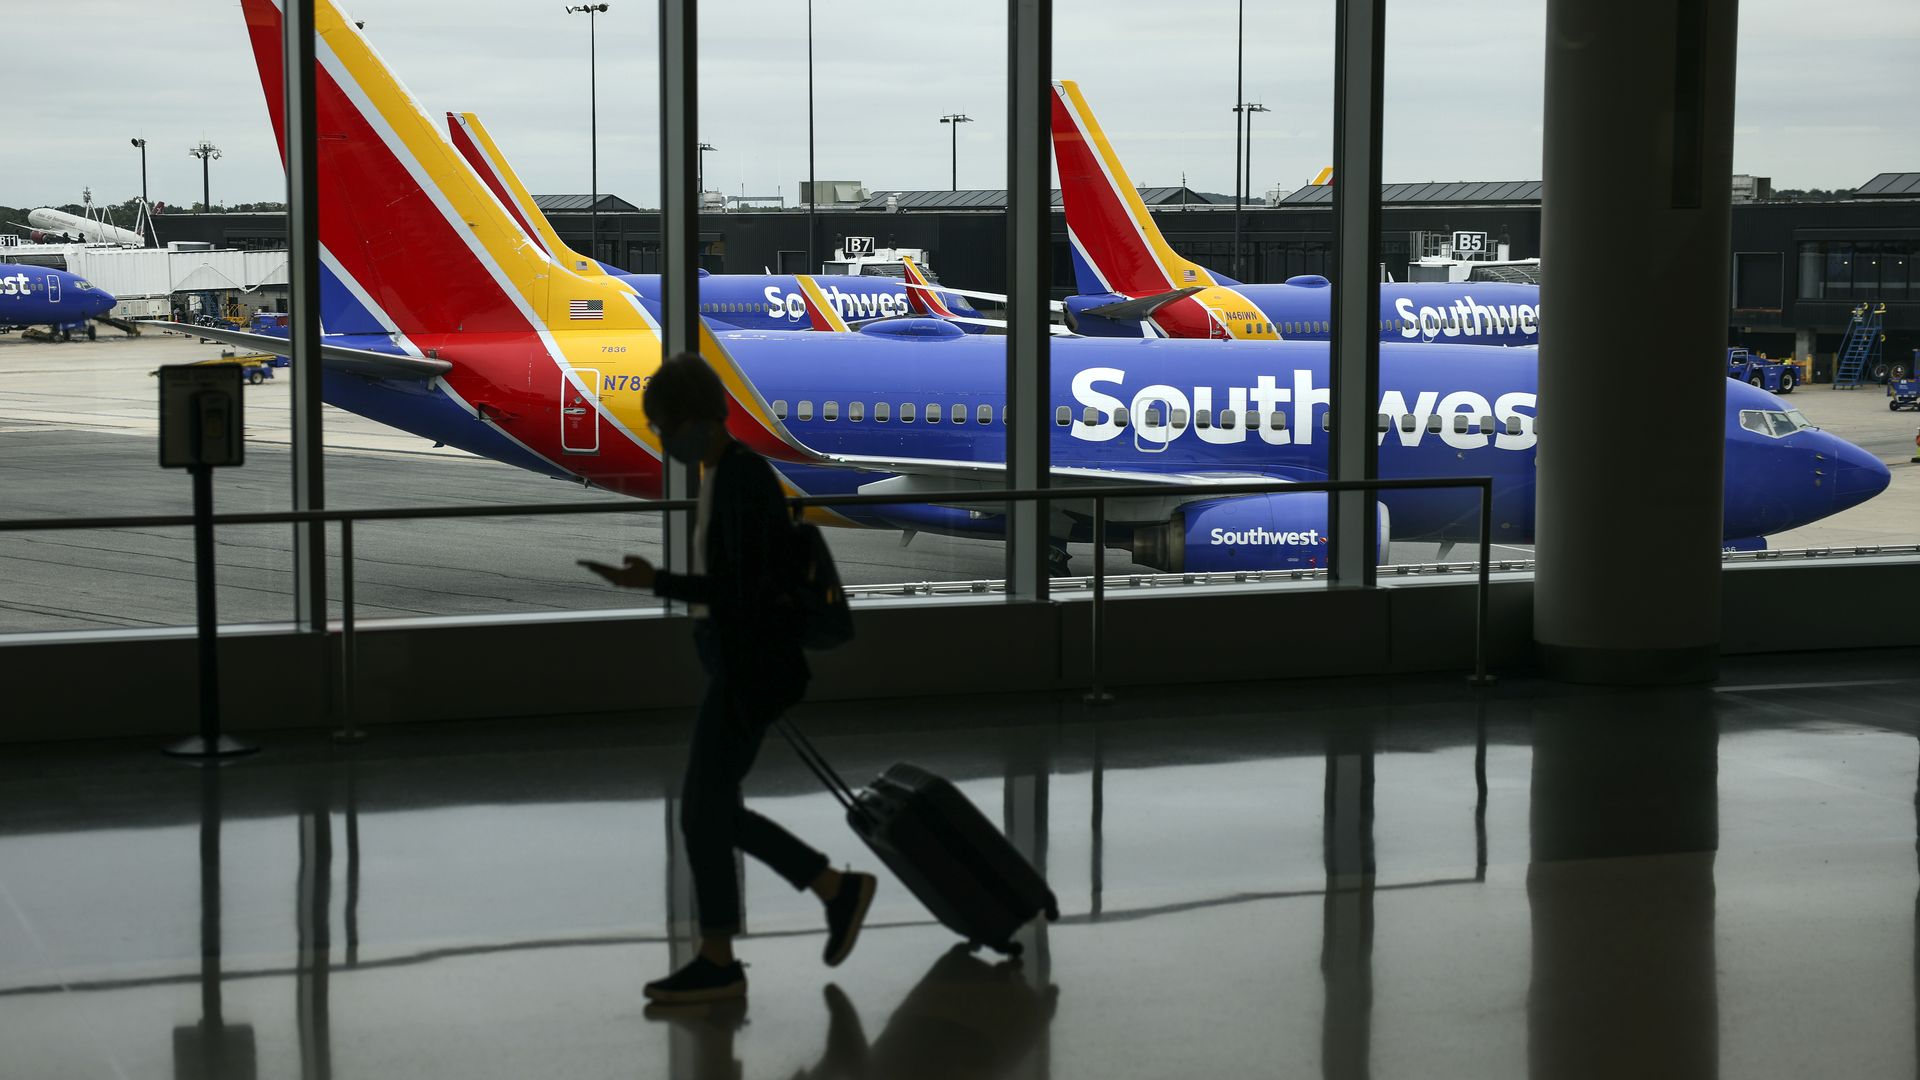 A person walking past a Southwest Airlines airplane Baltimore Washington International Thurgood Marshall Airport on Oct. 11.